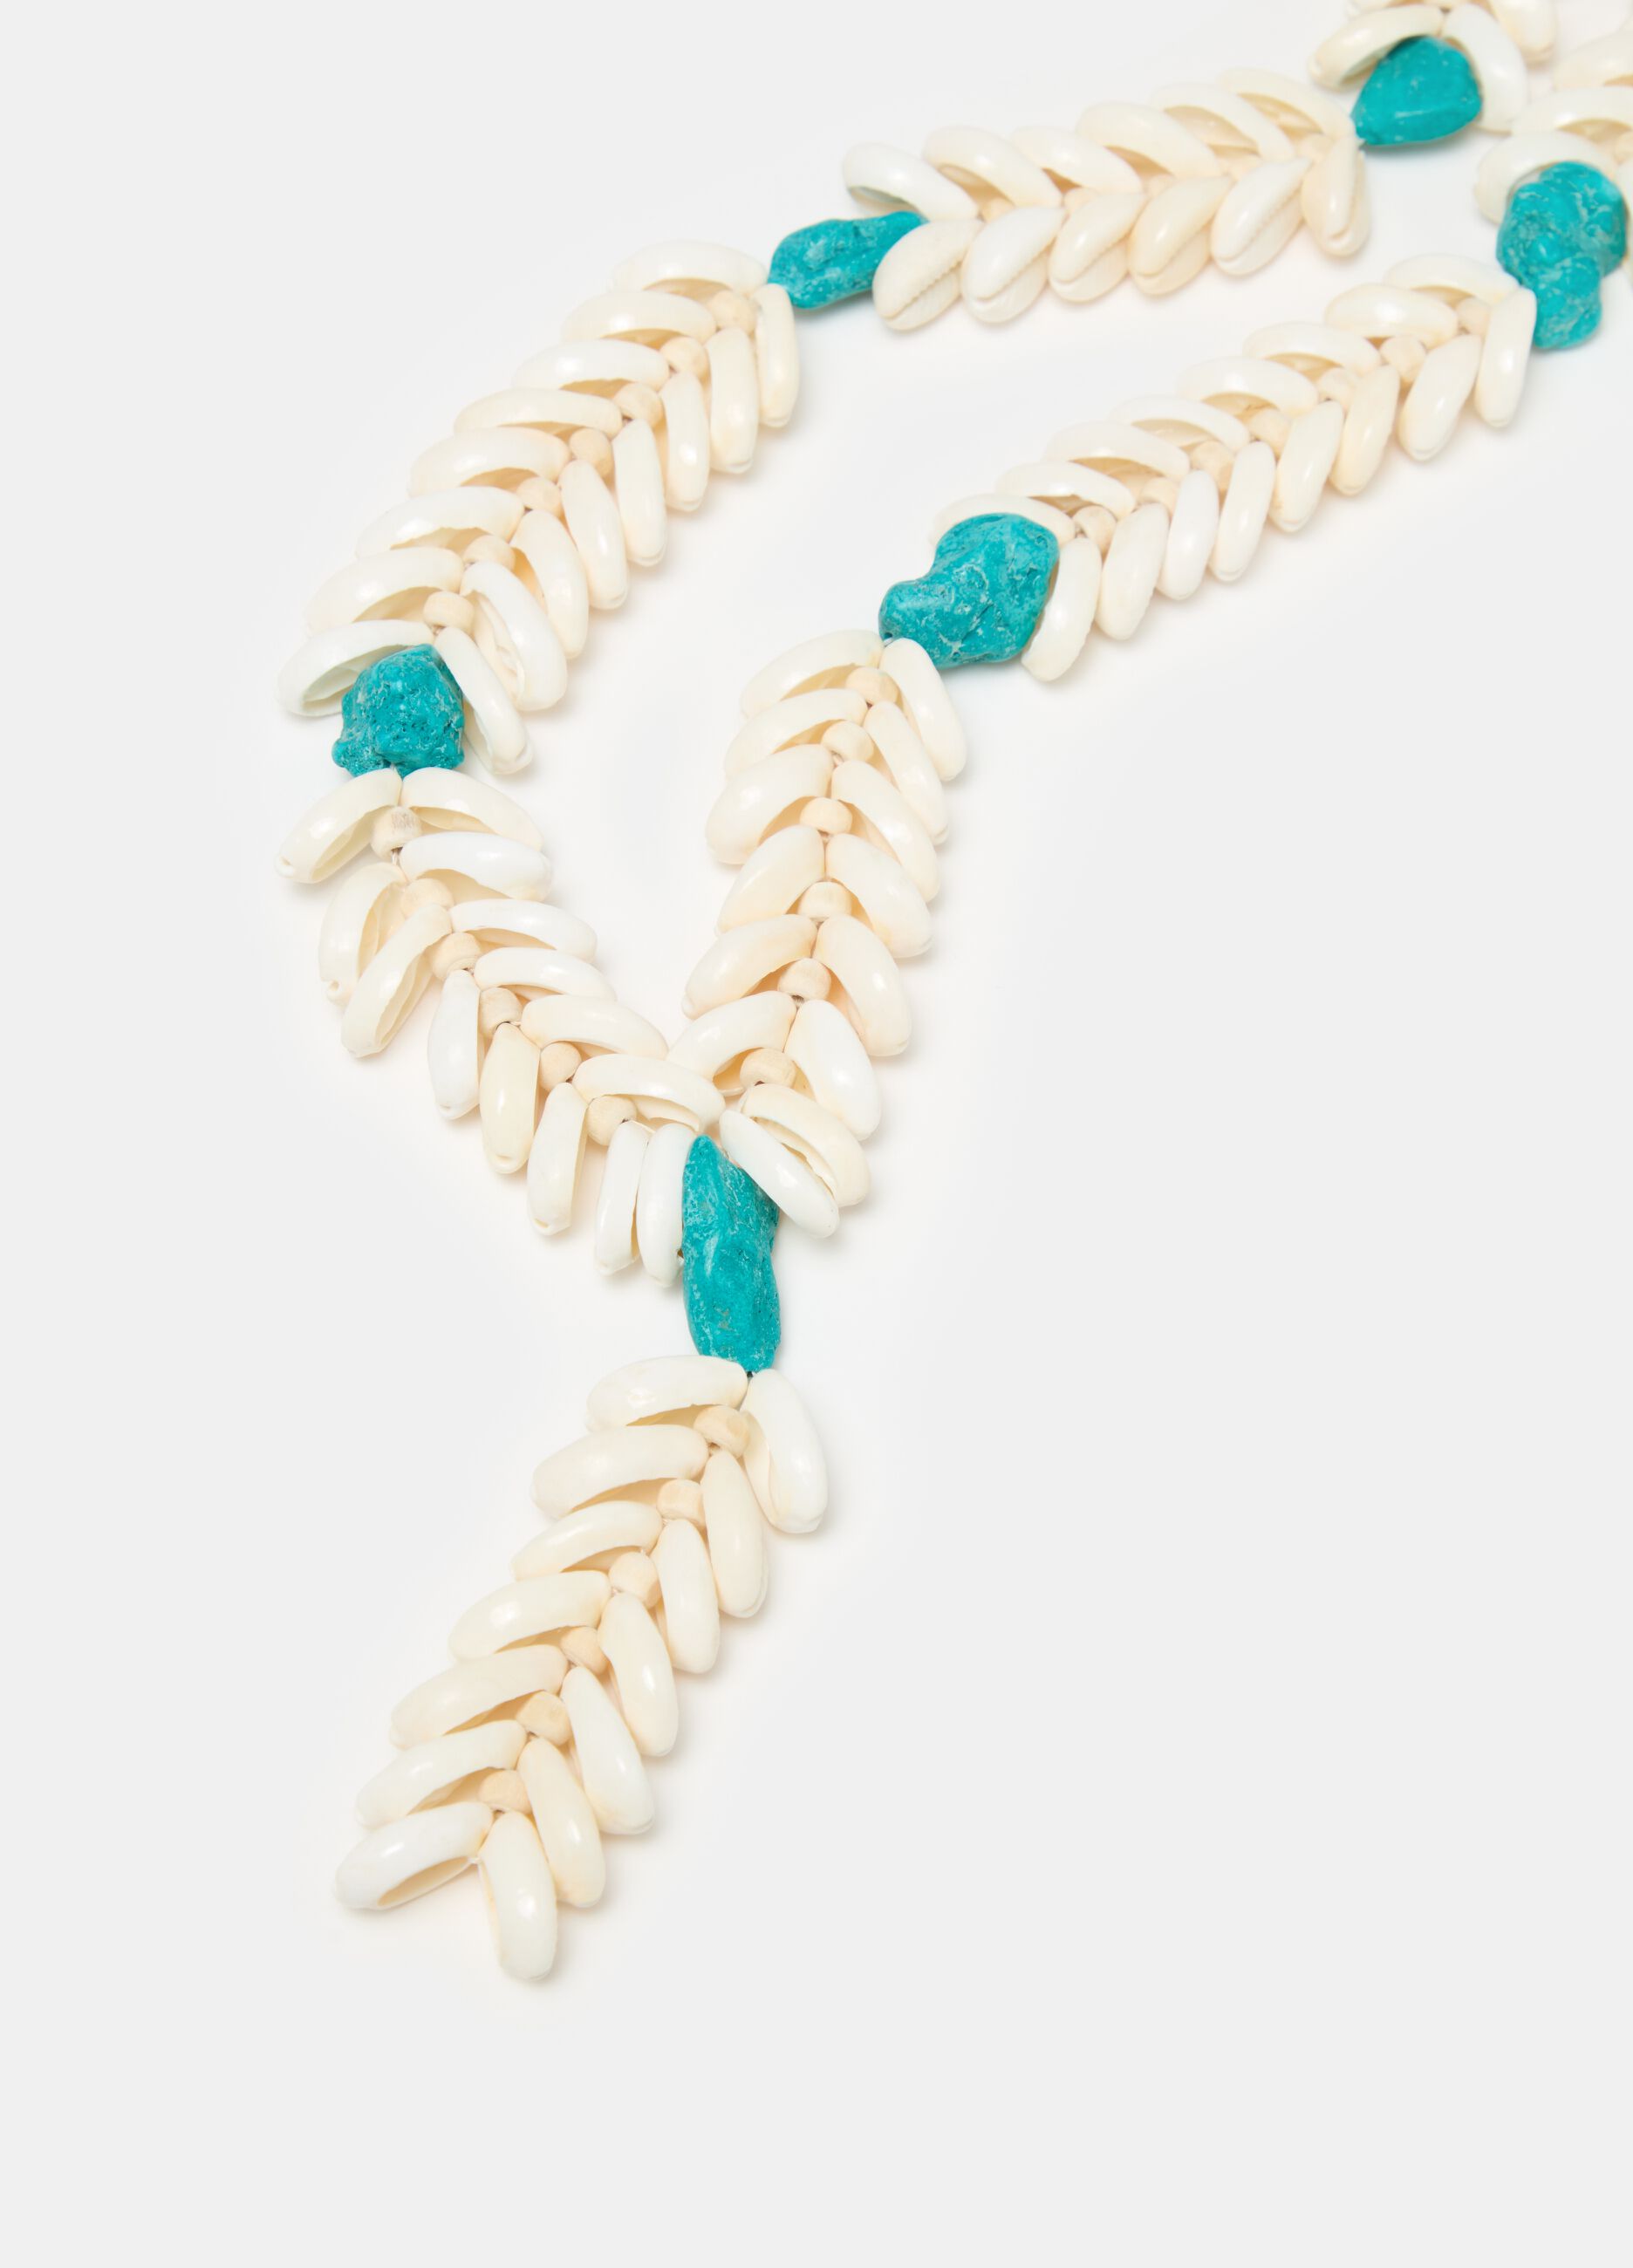 Ethnic necklace with shells and stones